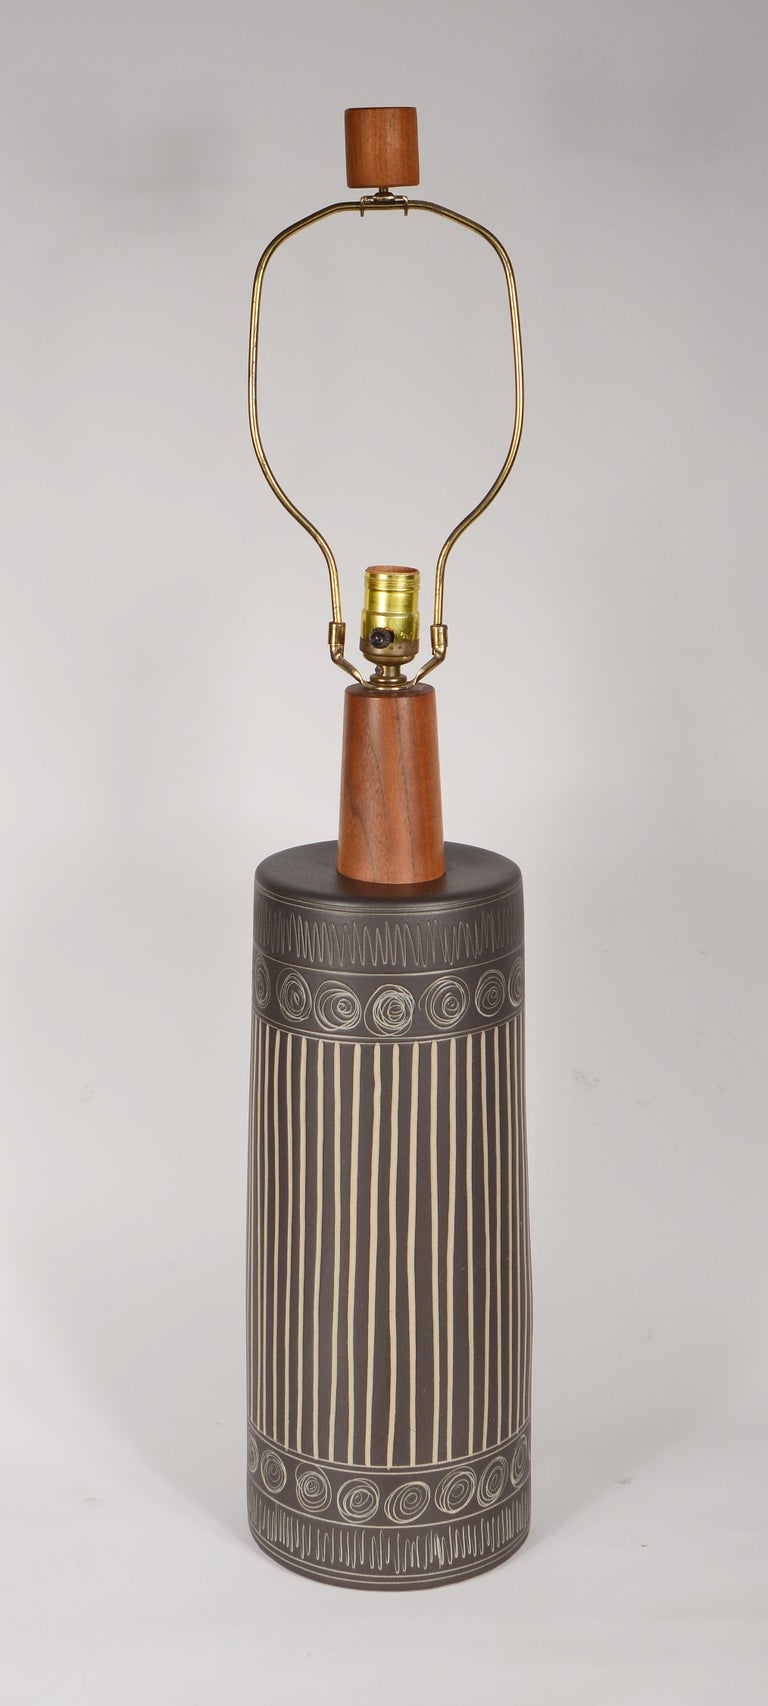 Ceramic table lamp by Gordon & Jane Martz for Marshall Studios. This lamp has a satin dark brown glaze with incised designs. This has the original walnut finial and wiring. We can rewire this at no charge if you would like. Height given is with the